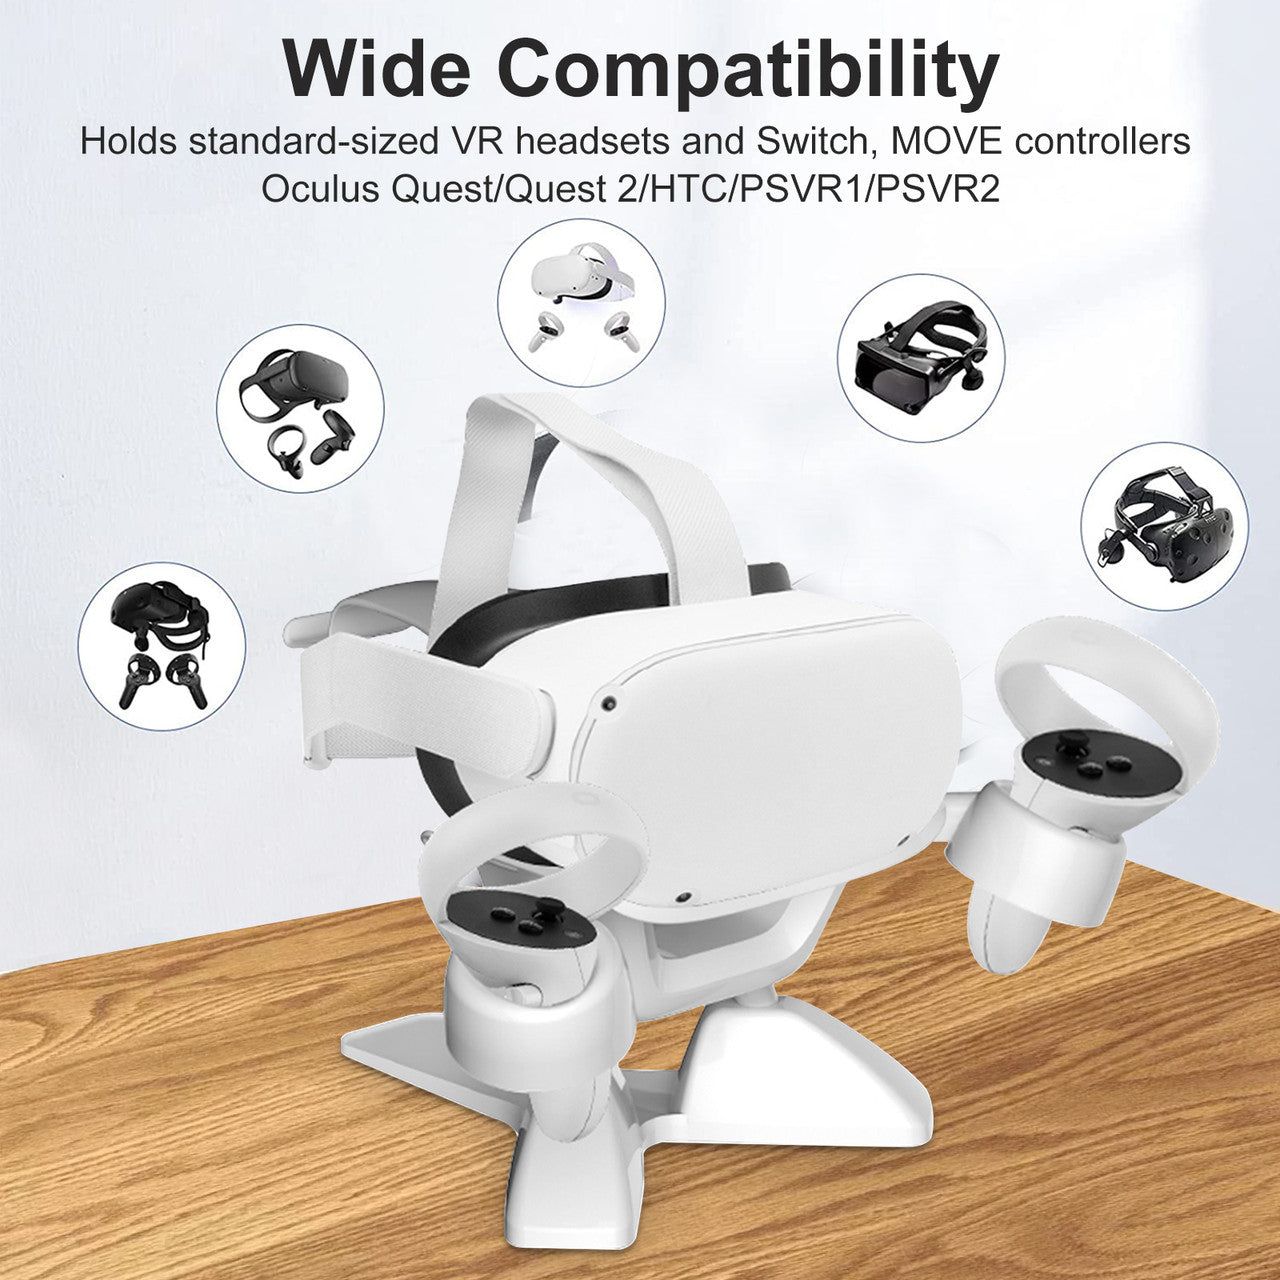 VR Stand Compatible - For Quest 2, Quest, Rift, Rift S, Valve Index Headsets & Touch Controllers (White)